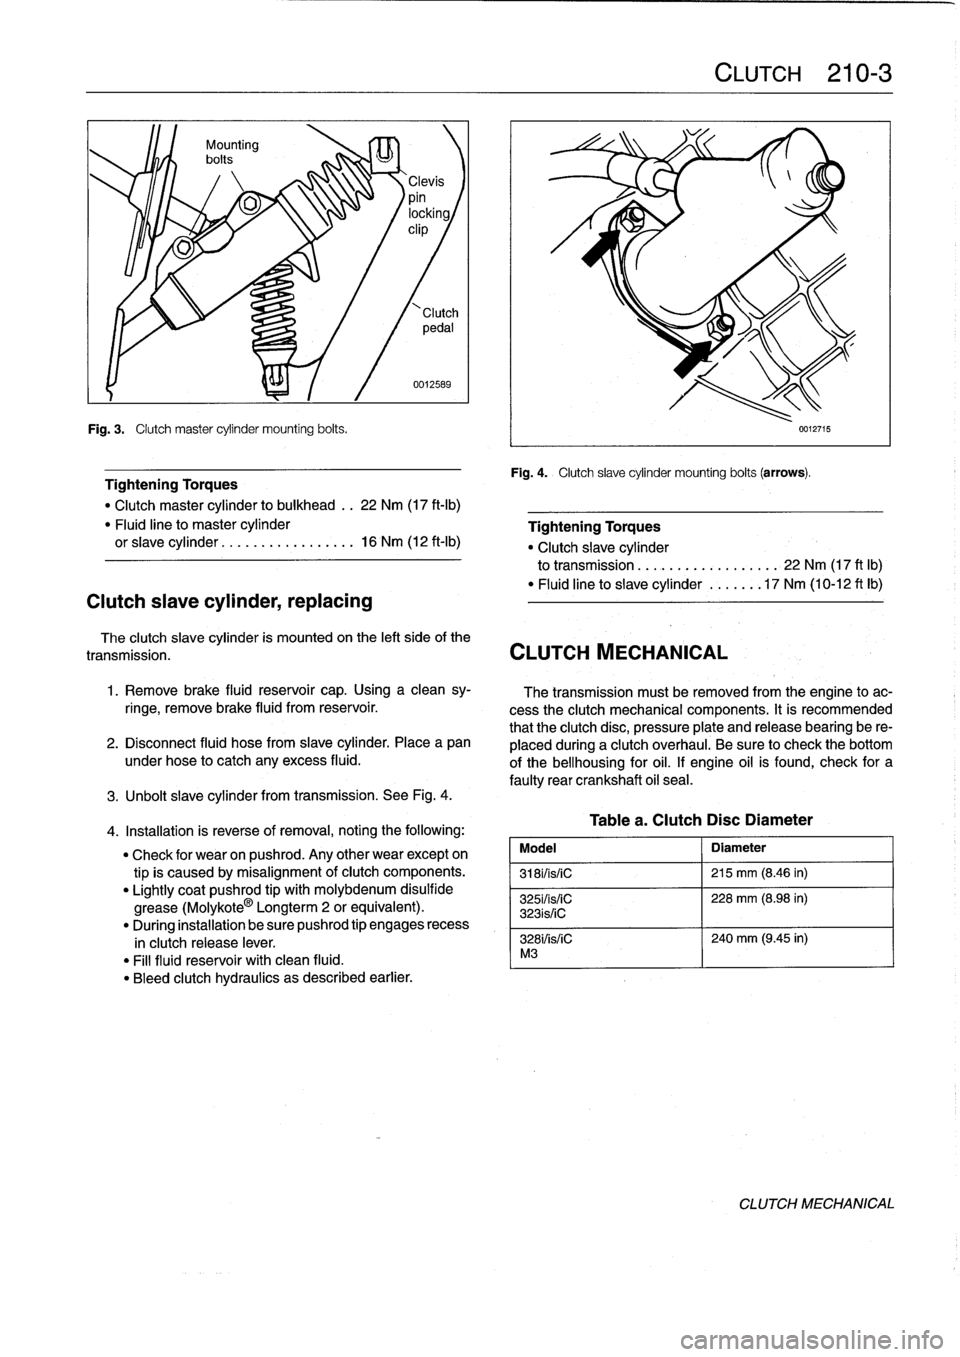 BMW 318i 1997 E36 Owners Guide Fig
.
3
.

	

Clutch
master
cylinder
mounting
bolts
.

Clutch
slave
cylinder,
replacing

0012589

Tightening
Torques

"
Clutch
master
cylinder
to
bulkhead
..
22
Nm
(17
ft-Ib)
"
Fluid
line
to
master
cy